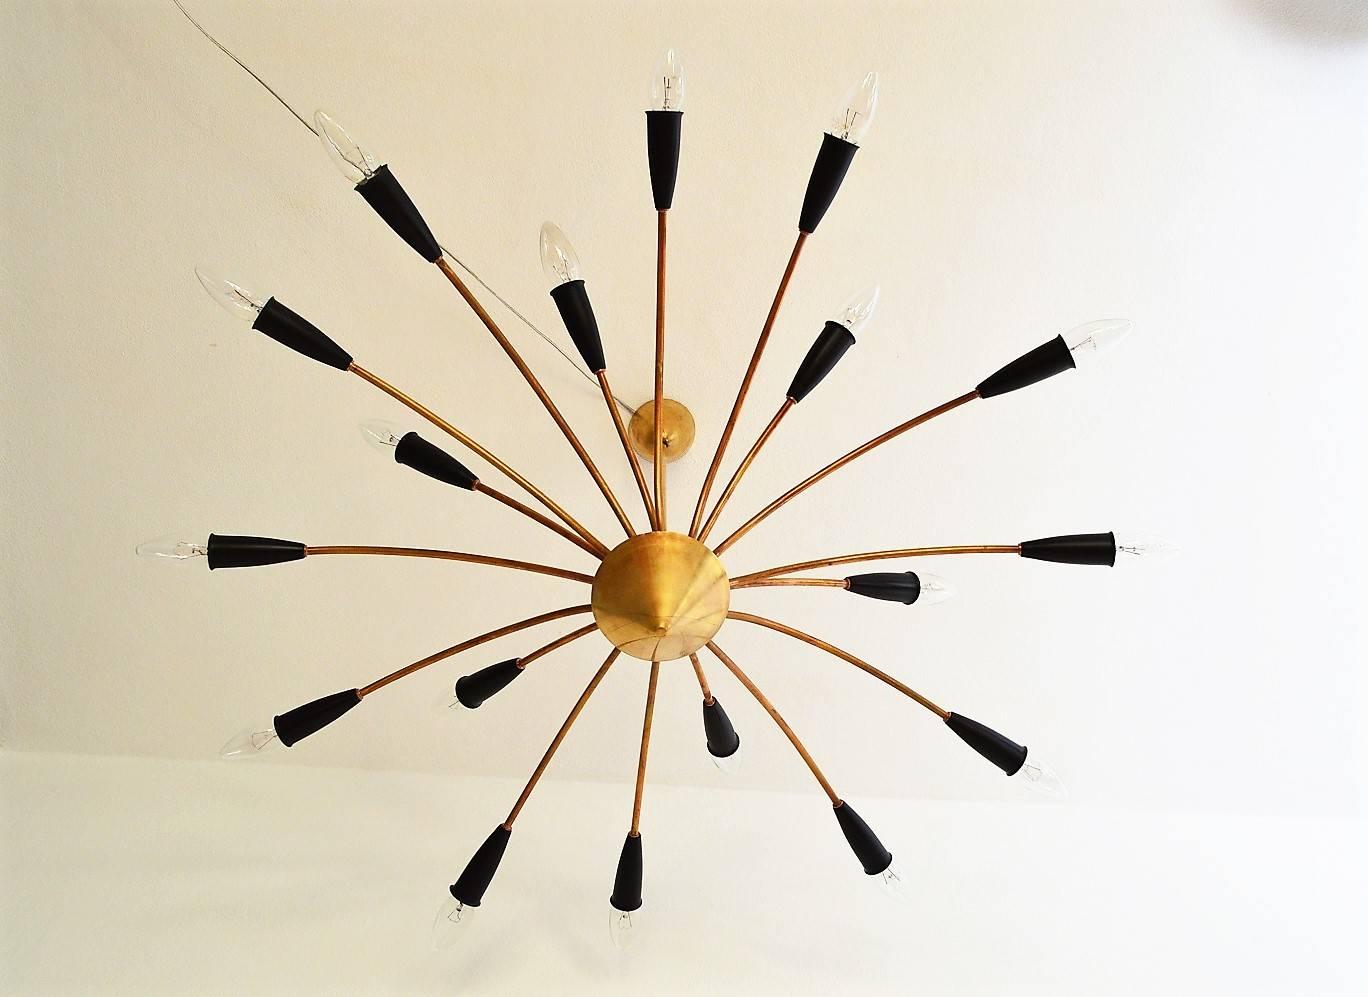 Beautiful Mid-Century Modern Sputnik chandelier or ceiling lamp with 18 arms made entirely of brass with metal details in black color.
Made in Italy in the 1950s
Completely restored and in excellent condition!
The chandelier has a diameter of